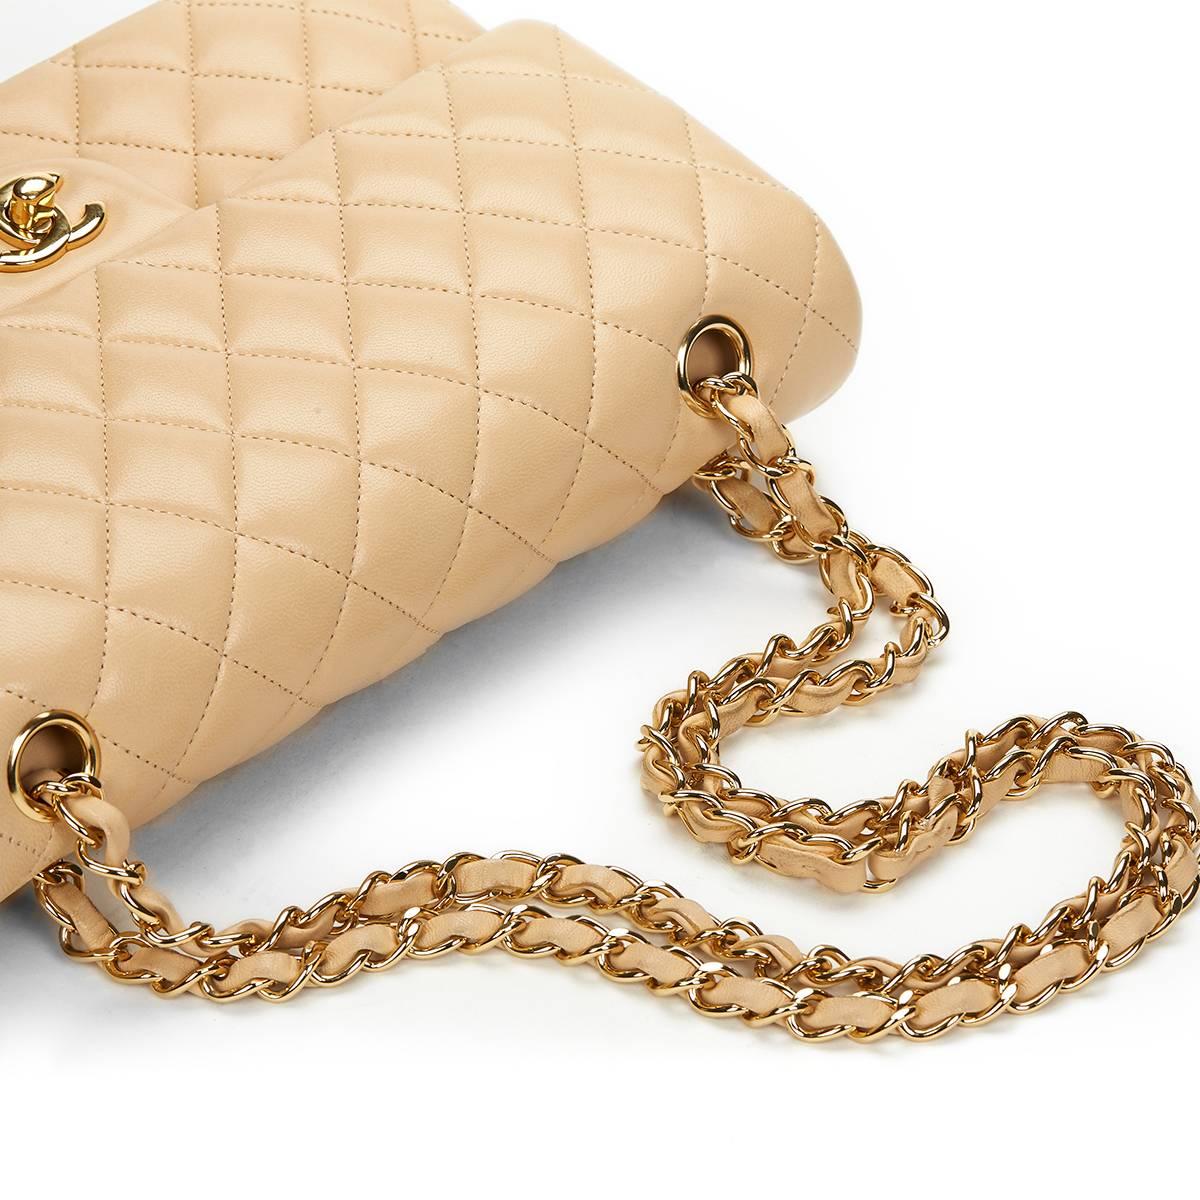 2012 Chanel Beige Quilted Lambskin Classic Double Flap Bag 5